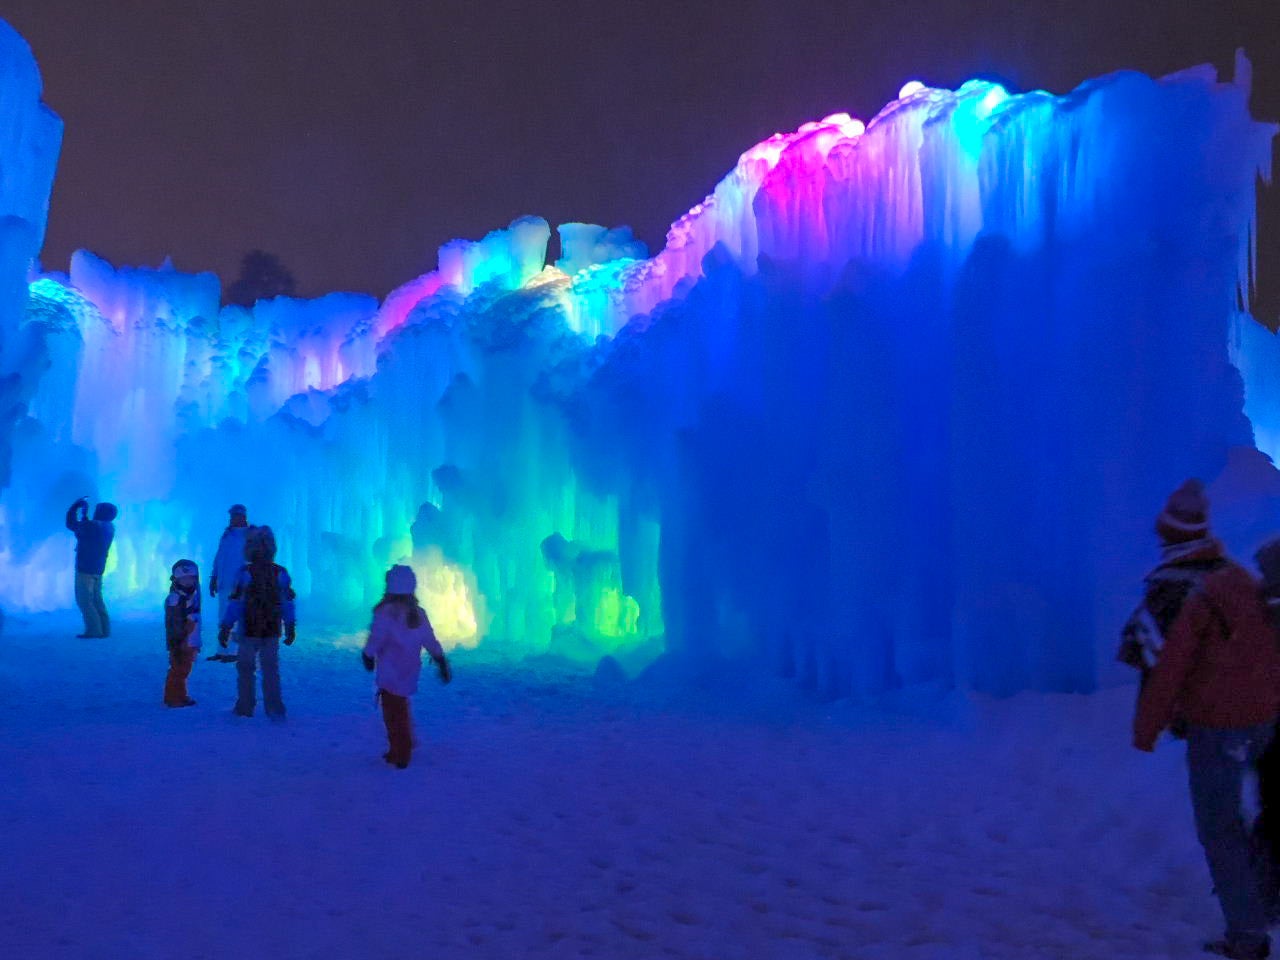 How to visit an ice castle in Colorado